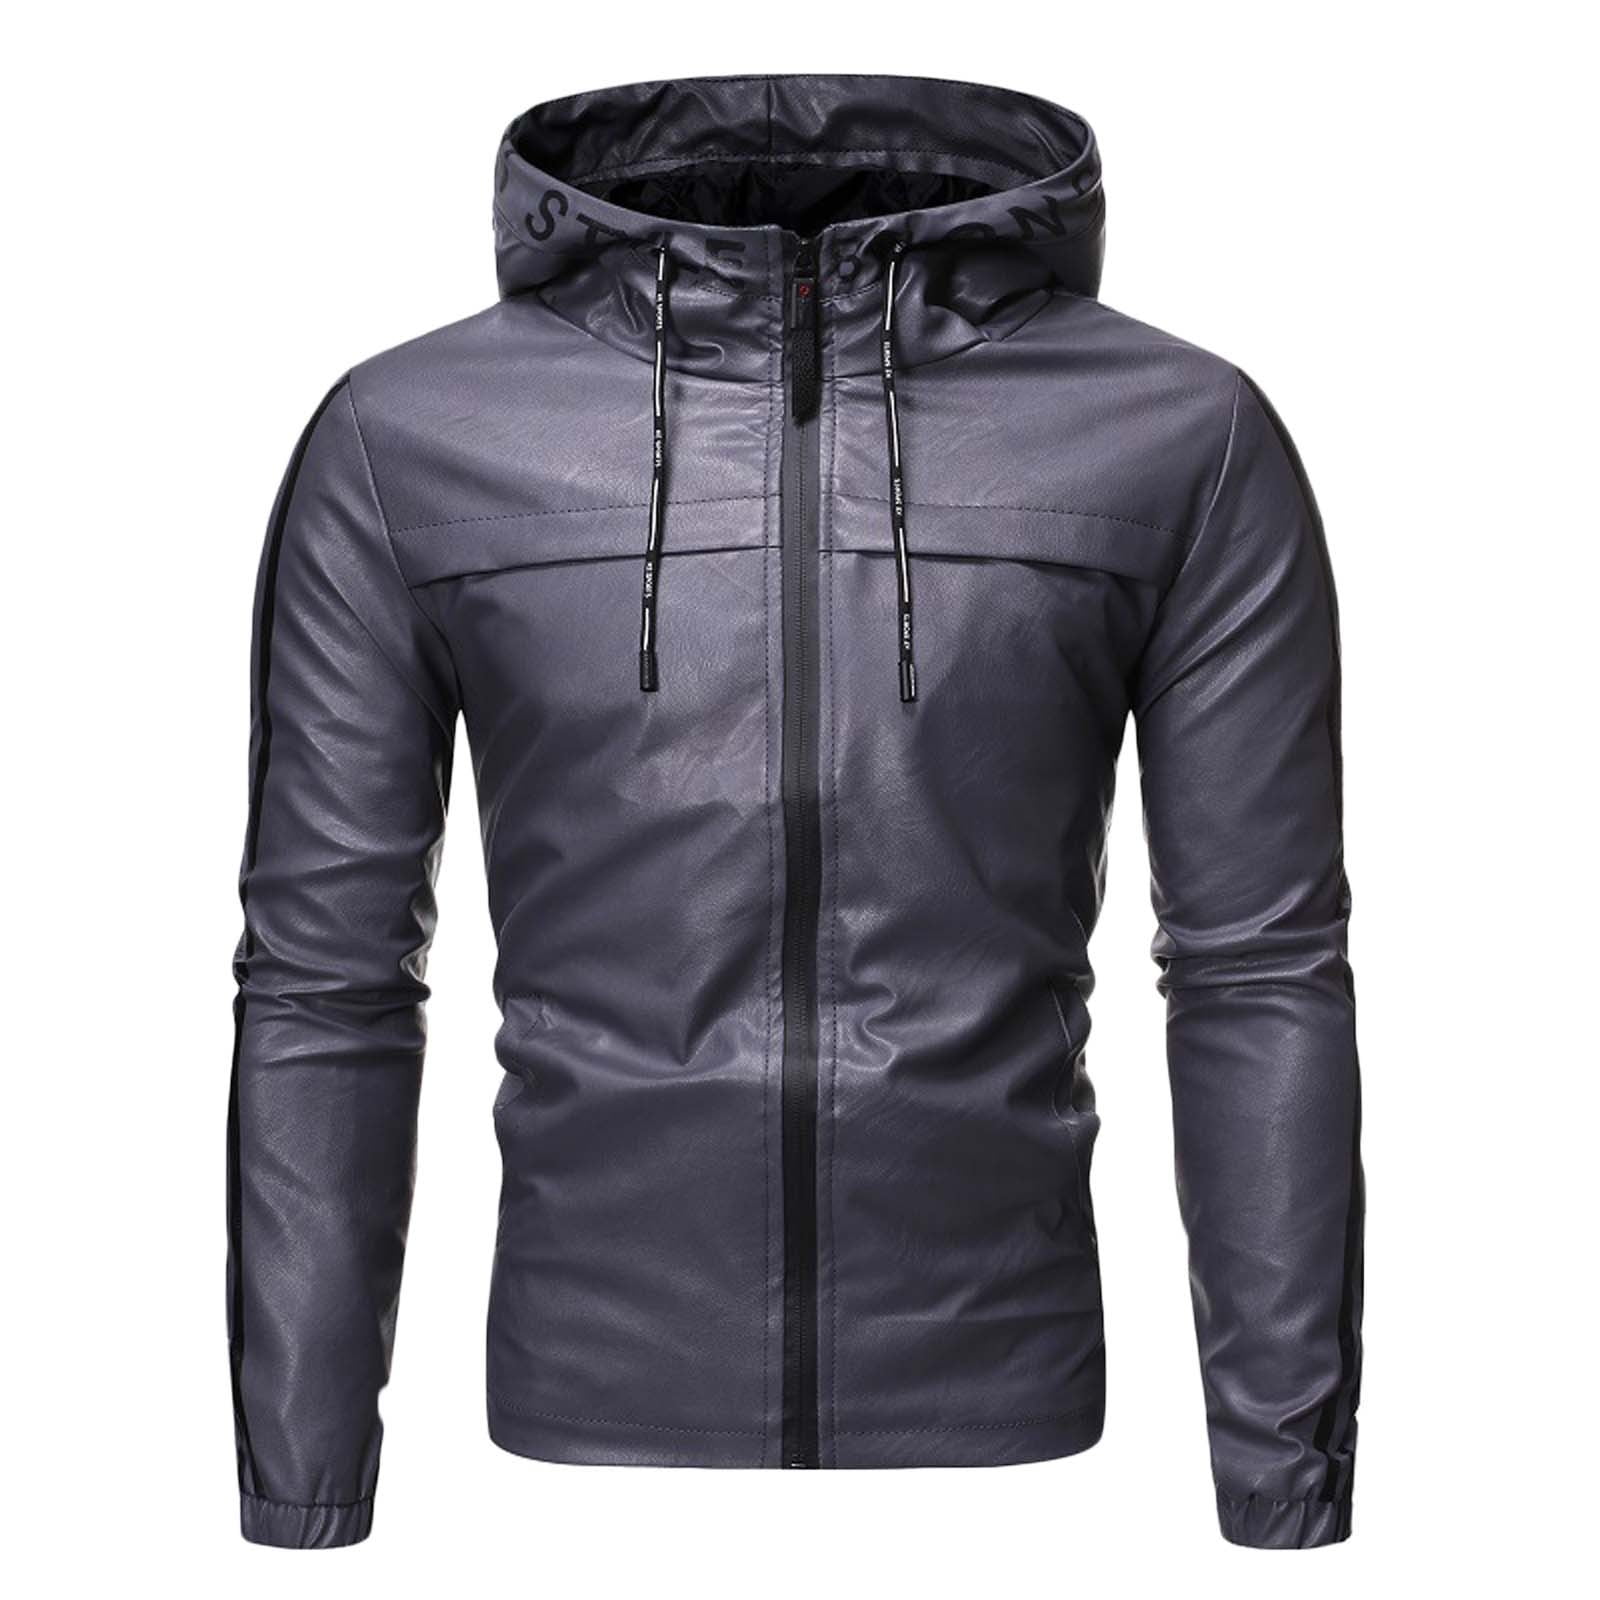 Mens Faux Leather Jacket Slim Fit Stand Collar Pu Motorcycle Long Sleeve  Lightweight Casual Hoodie Outwear & Jackets 